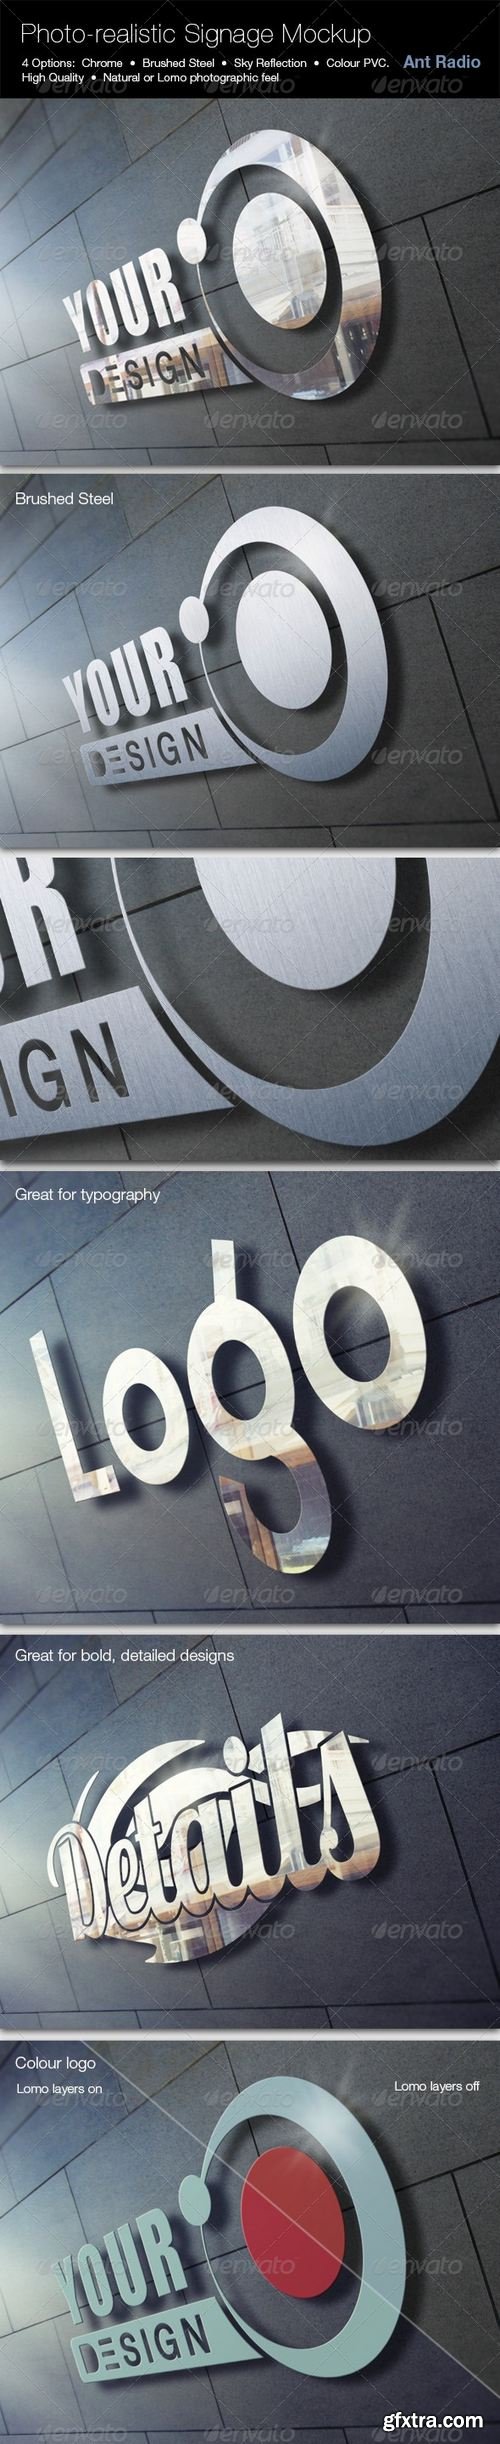 Graphicriver Photorealistic Metal Signage Mock-up 7783448